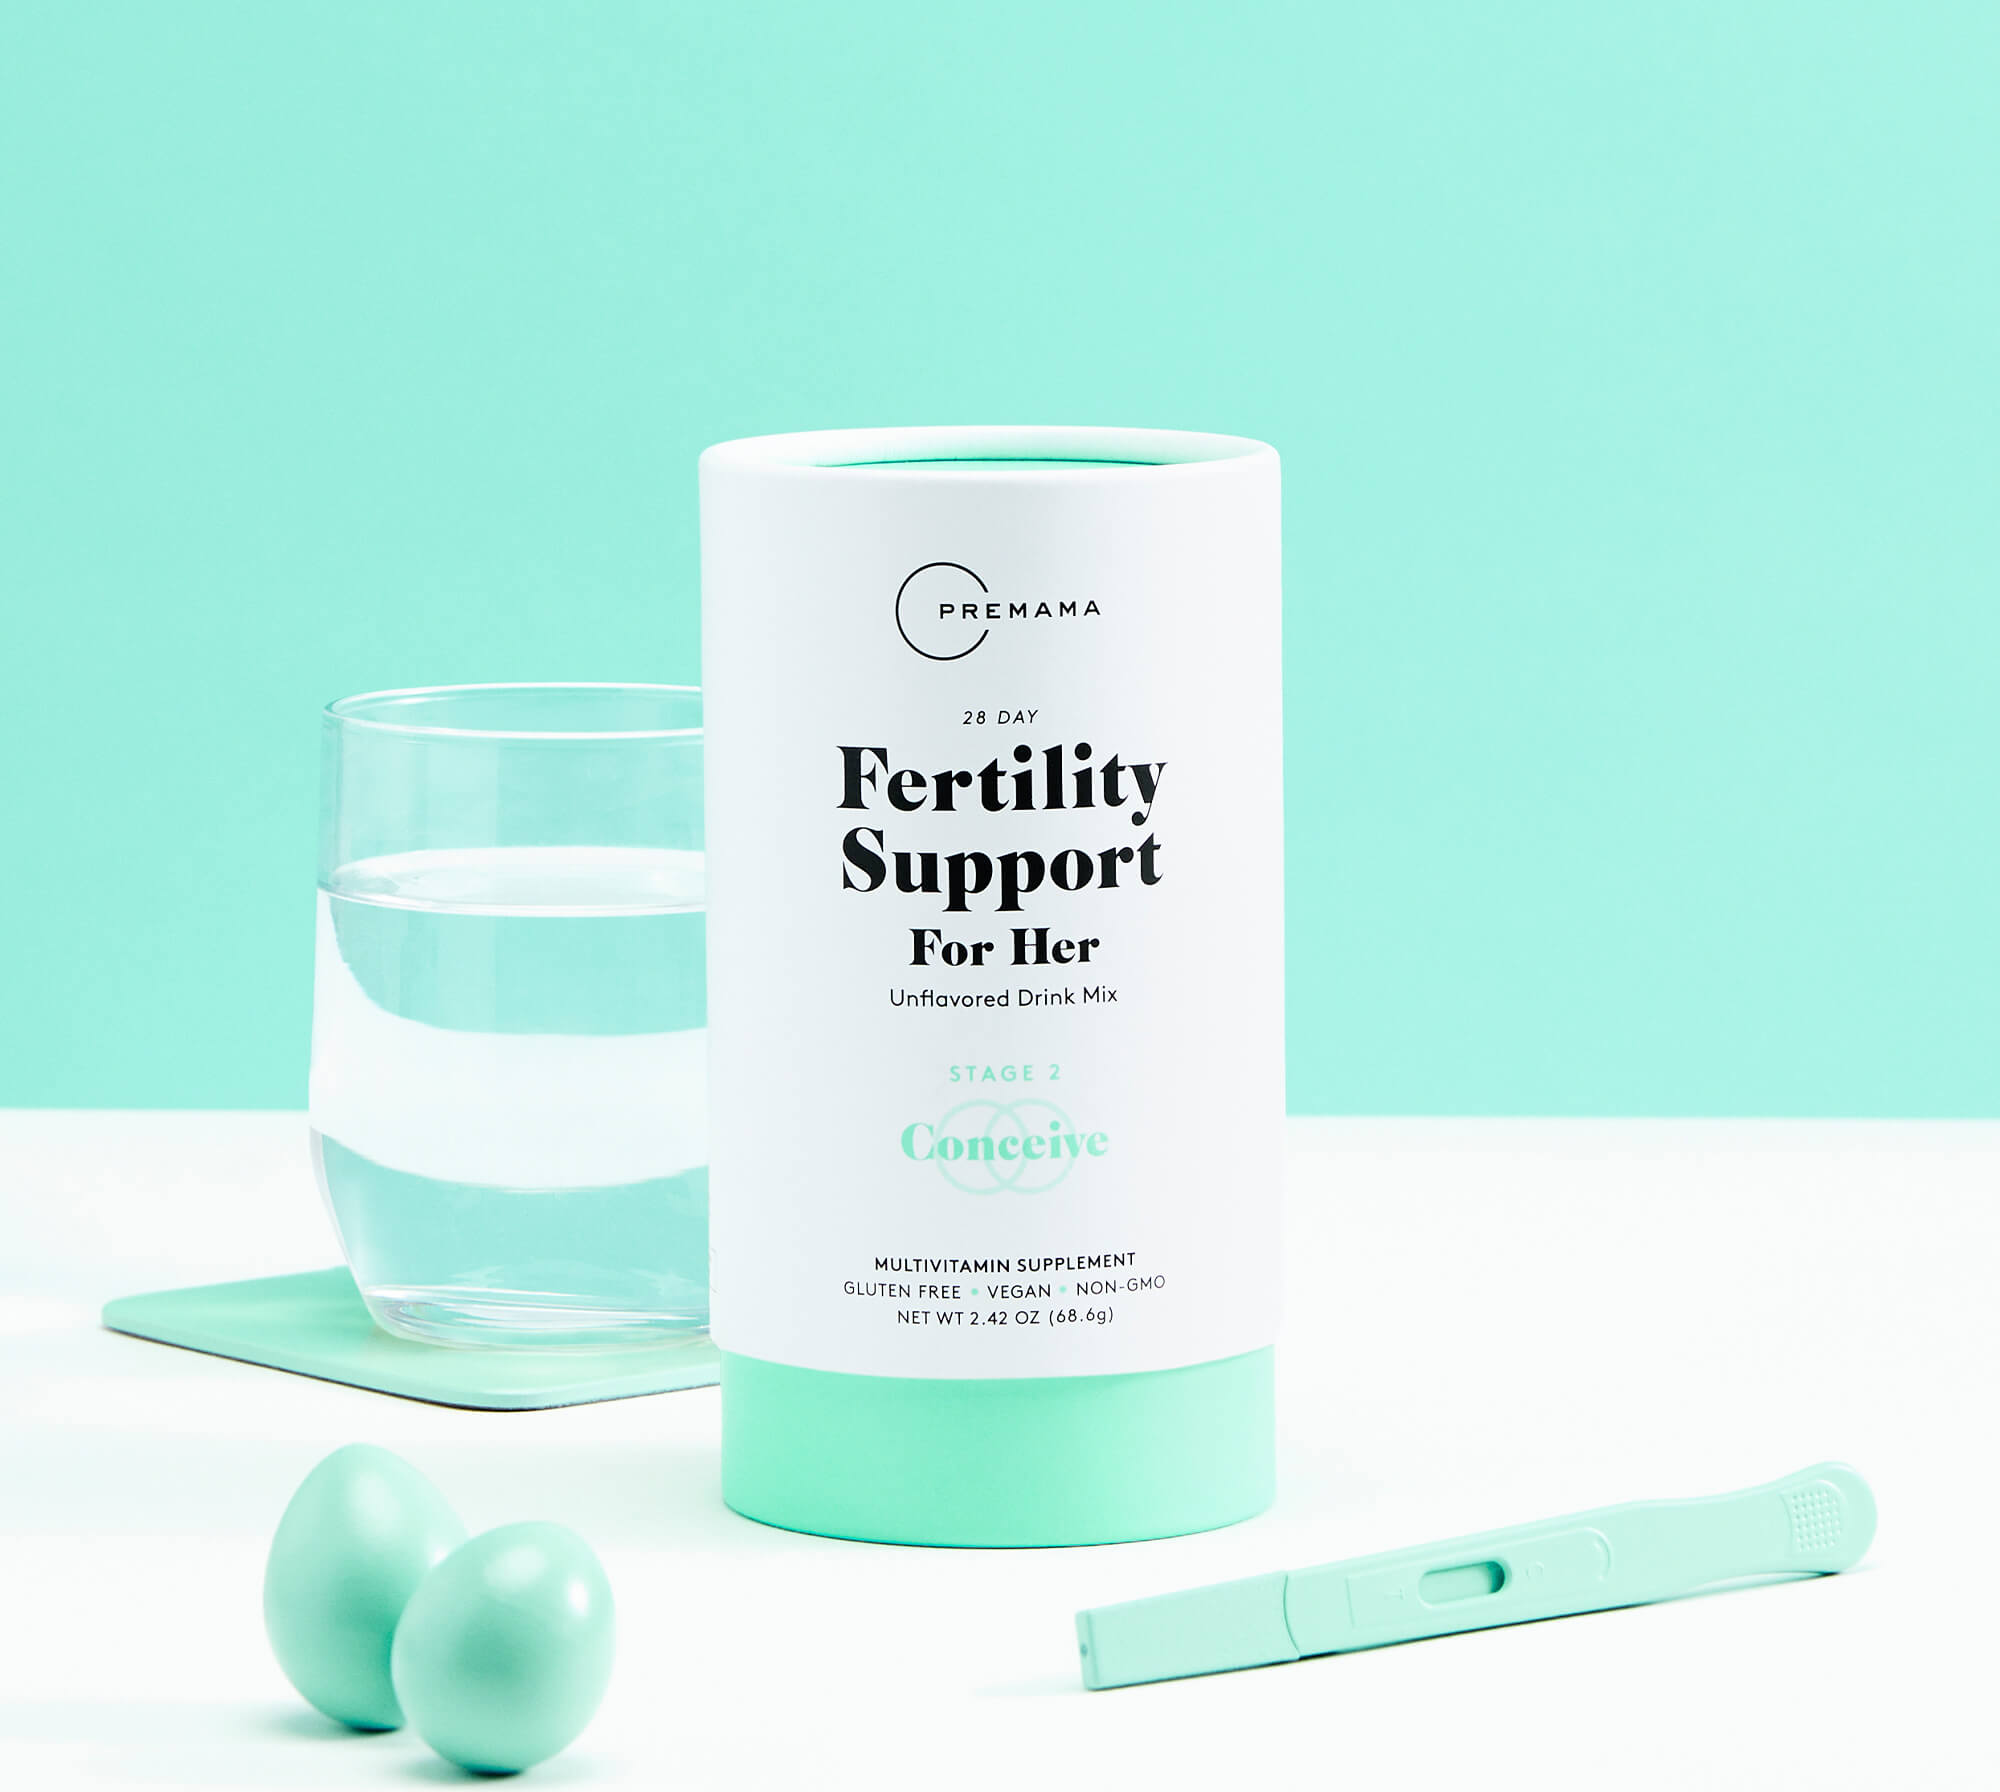 Fertility Support For Her*